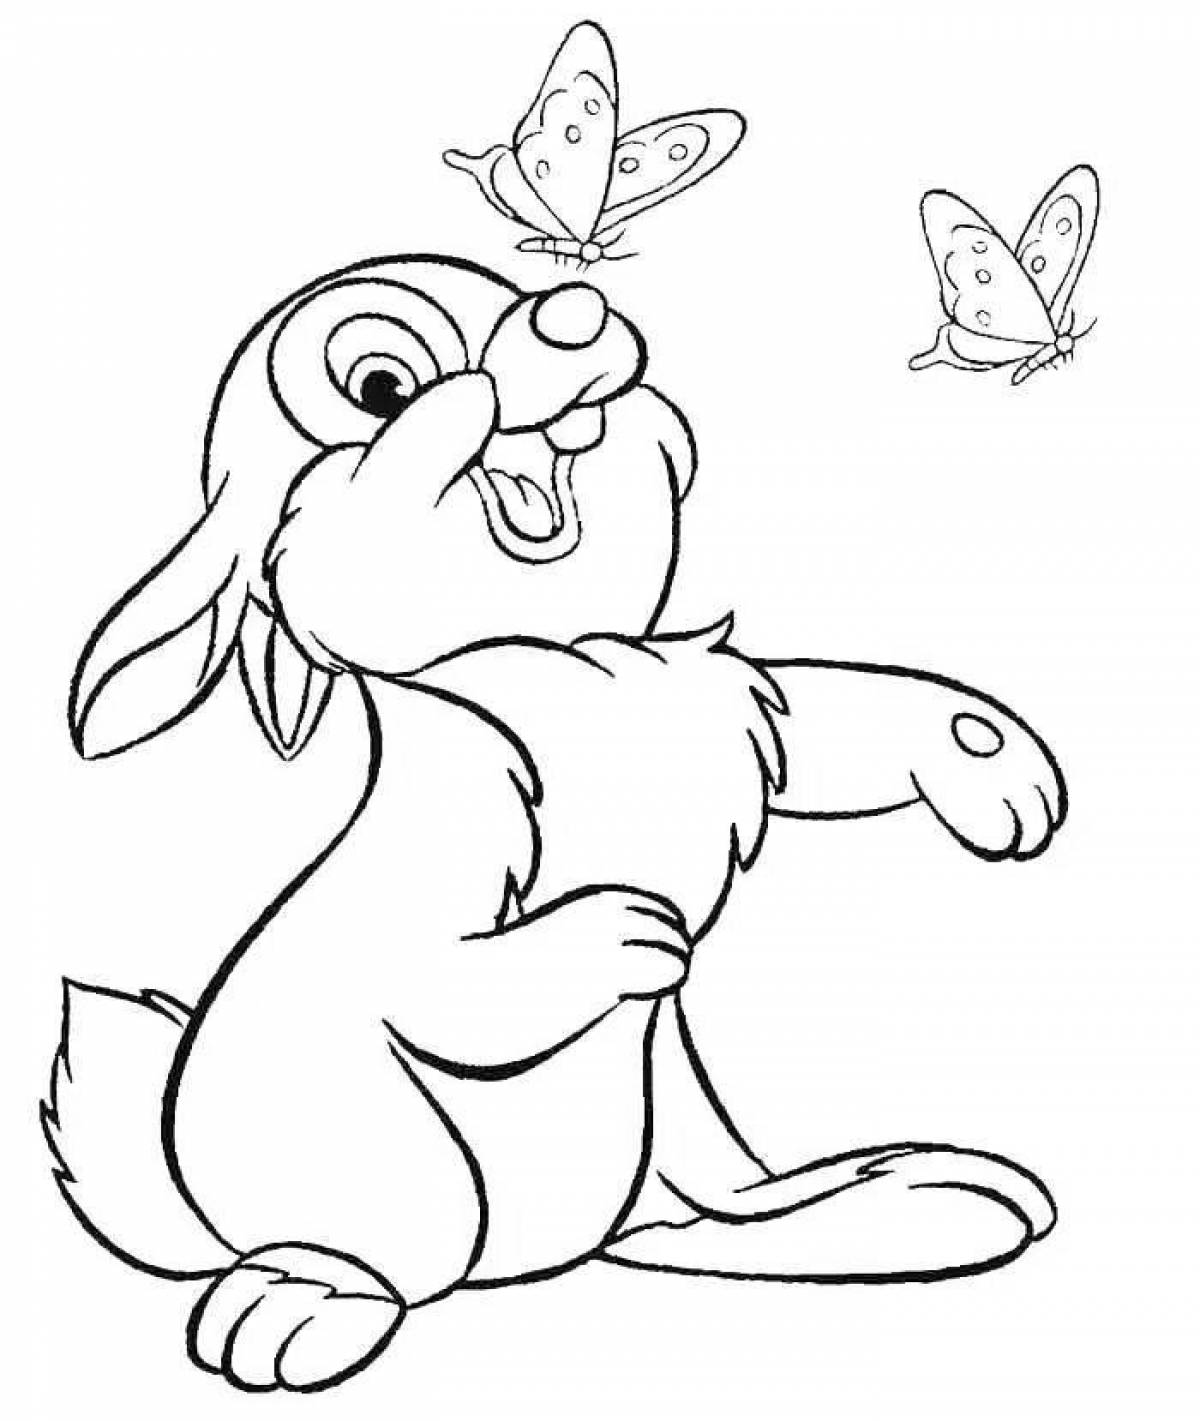 Colorful coloring page year of the hare